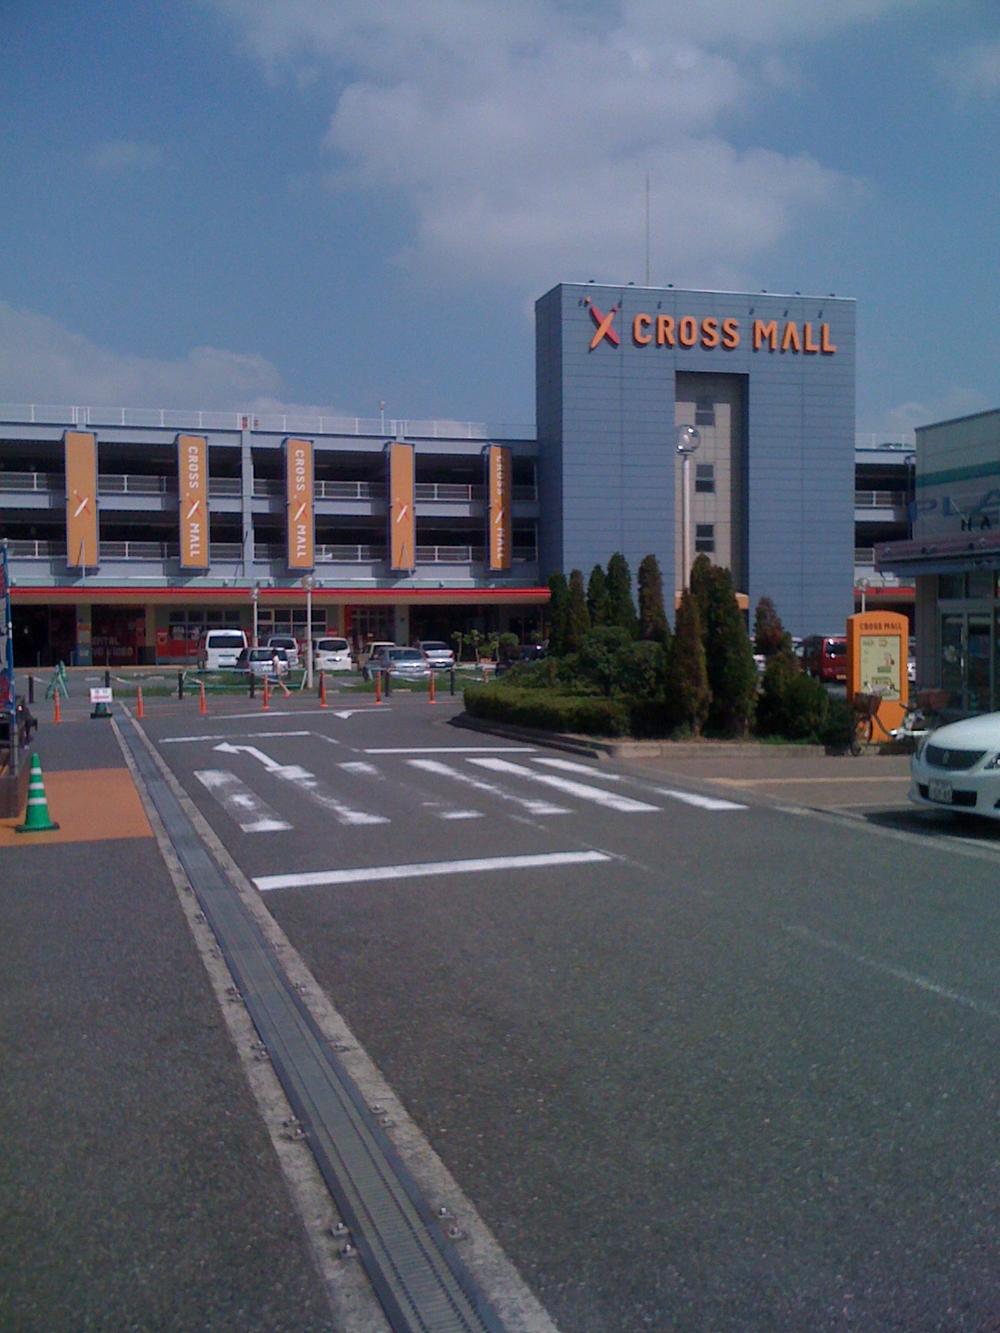 Shopping centre. It also contains 1040m cinema to cross Mall.